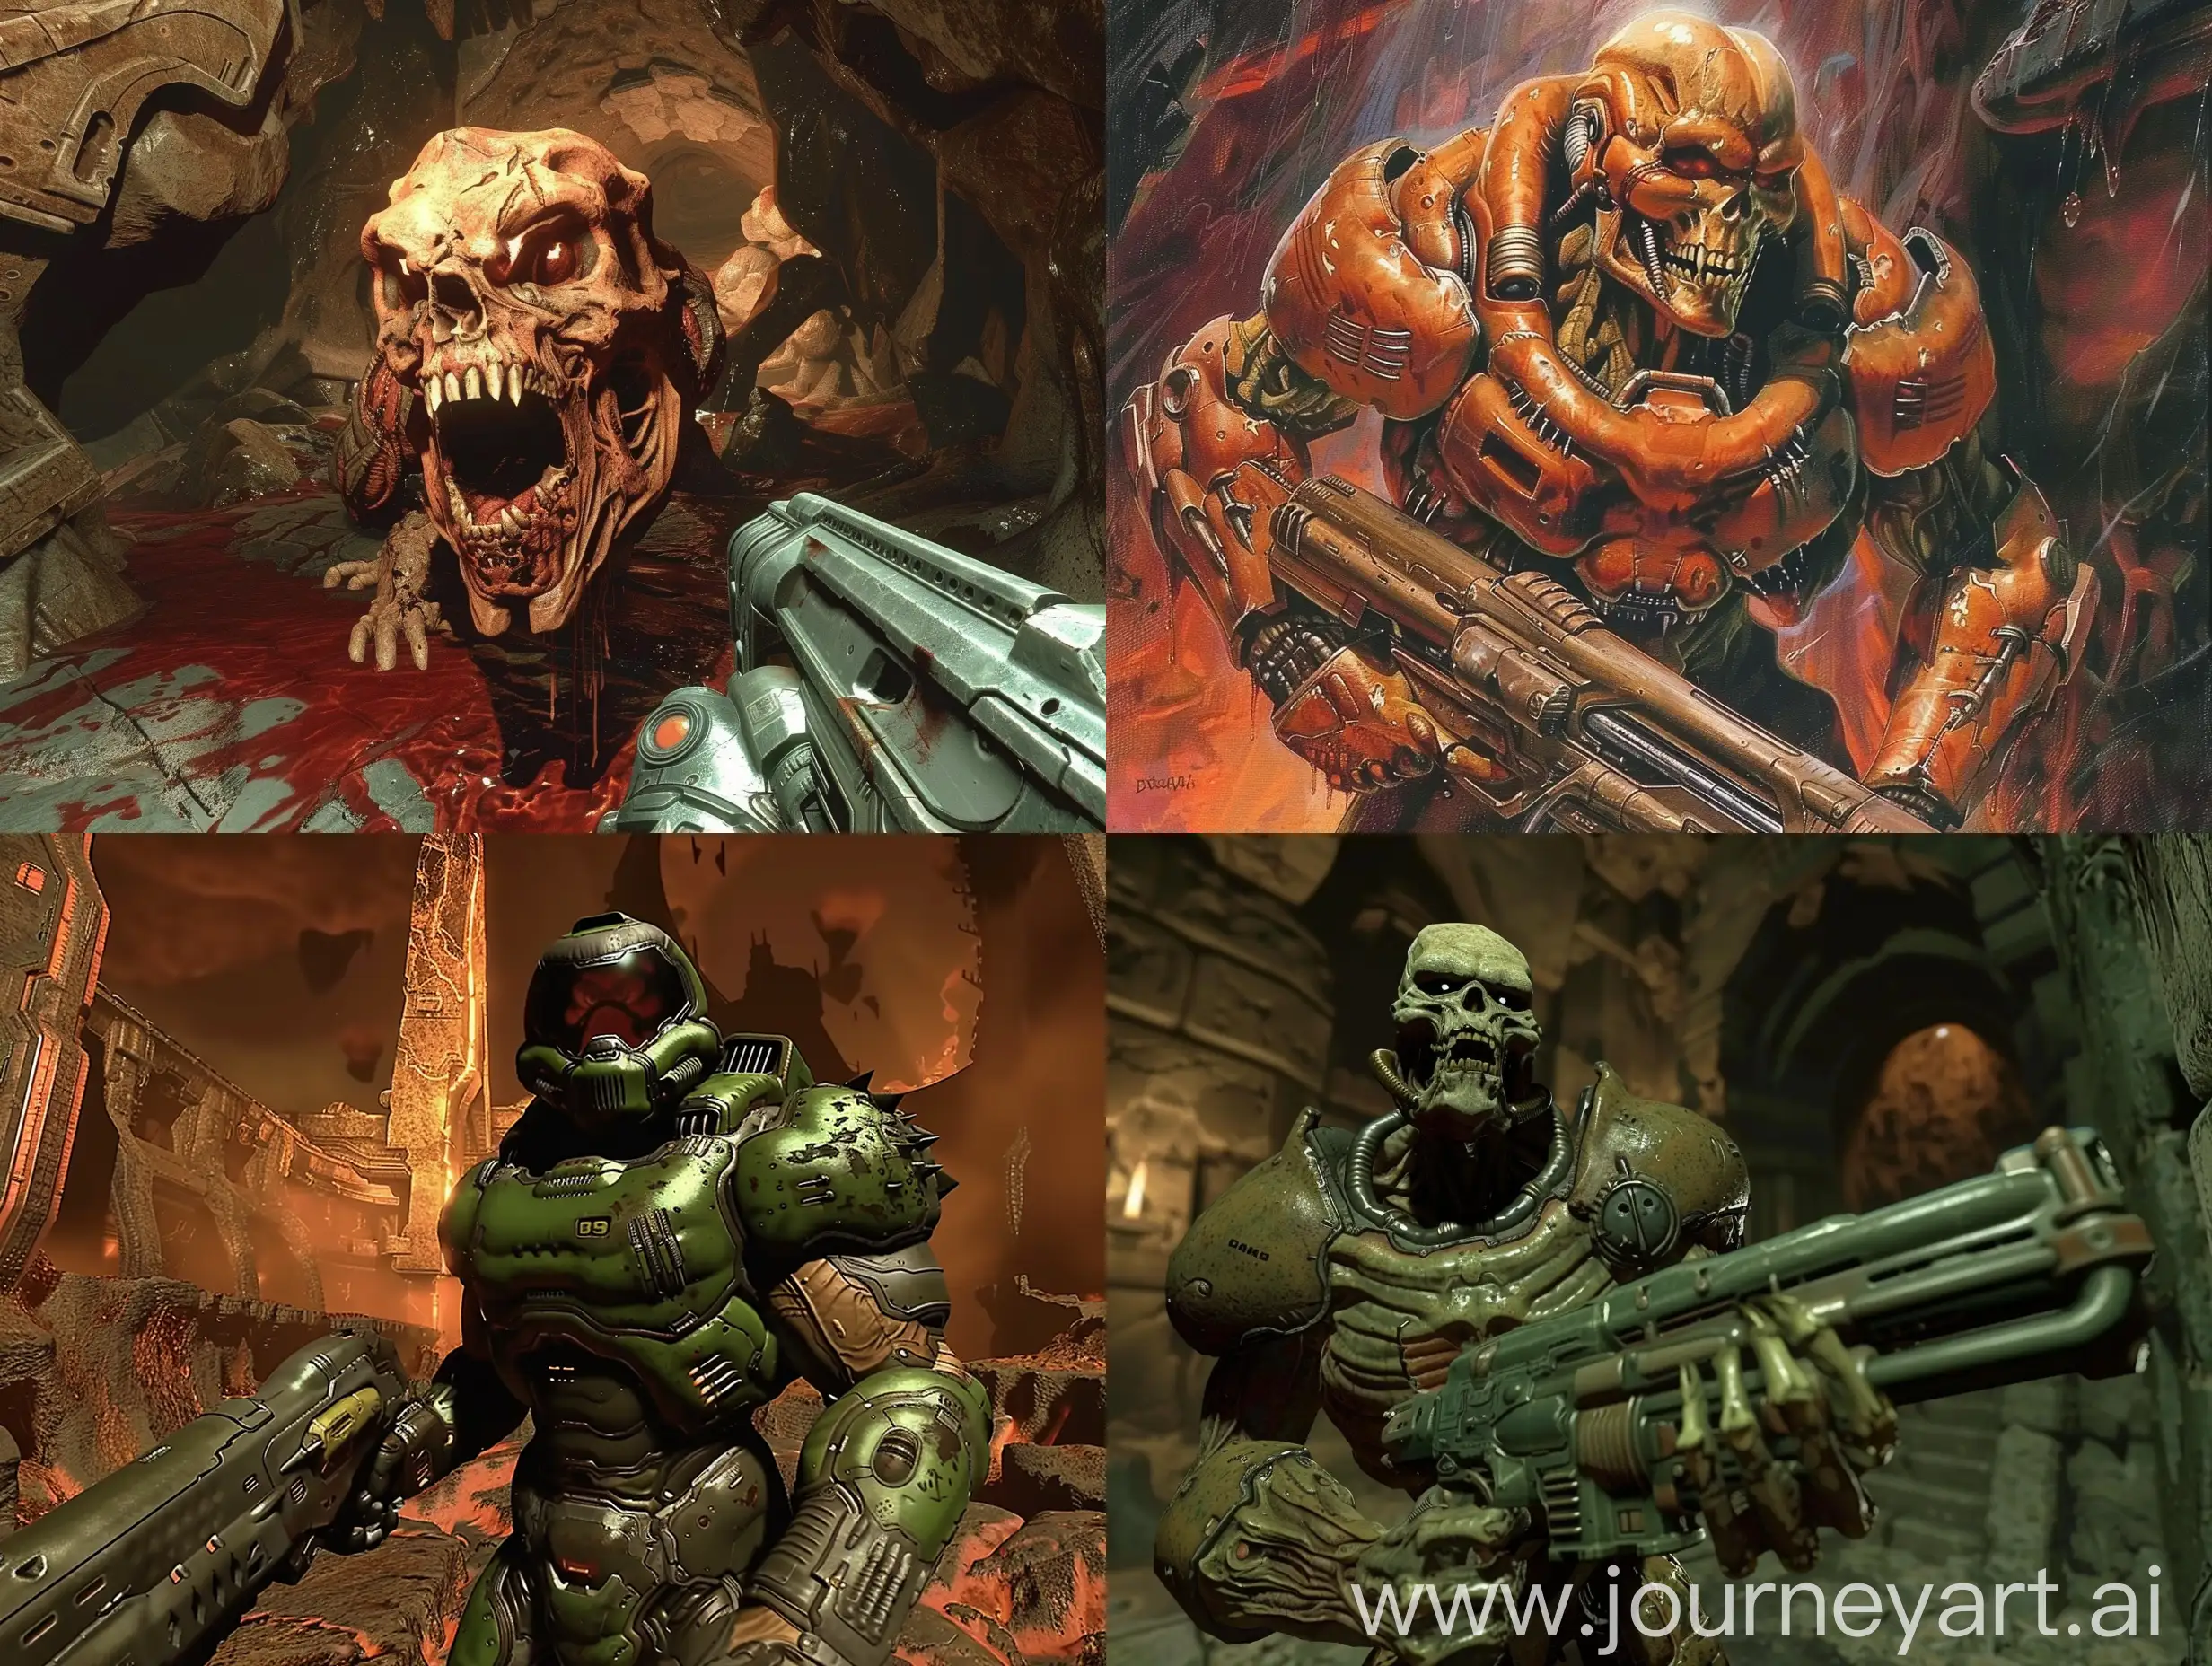 Classic-Doom-1993-Video-Game-Level-6-Aspect-Ratio-43-Fiery-Encounter-with-64714-Demons